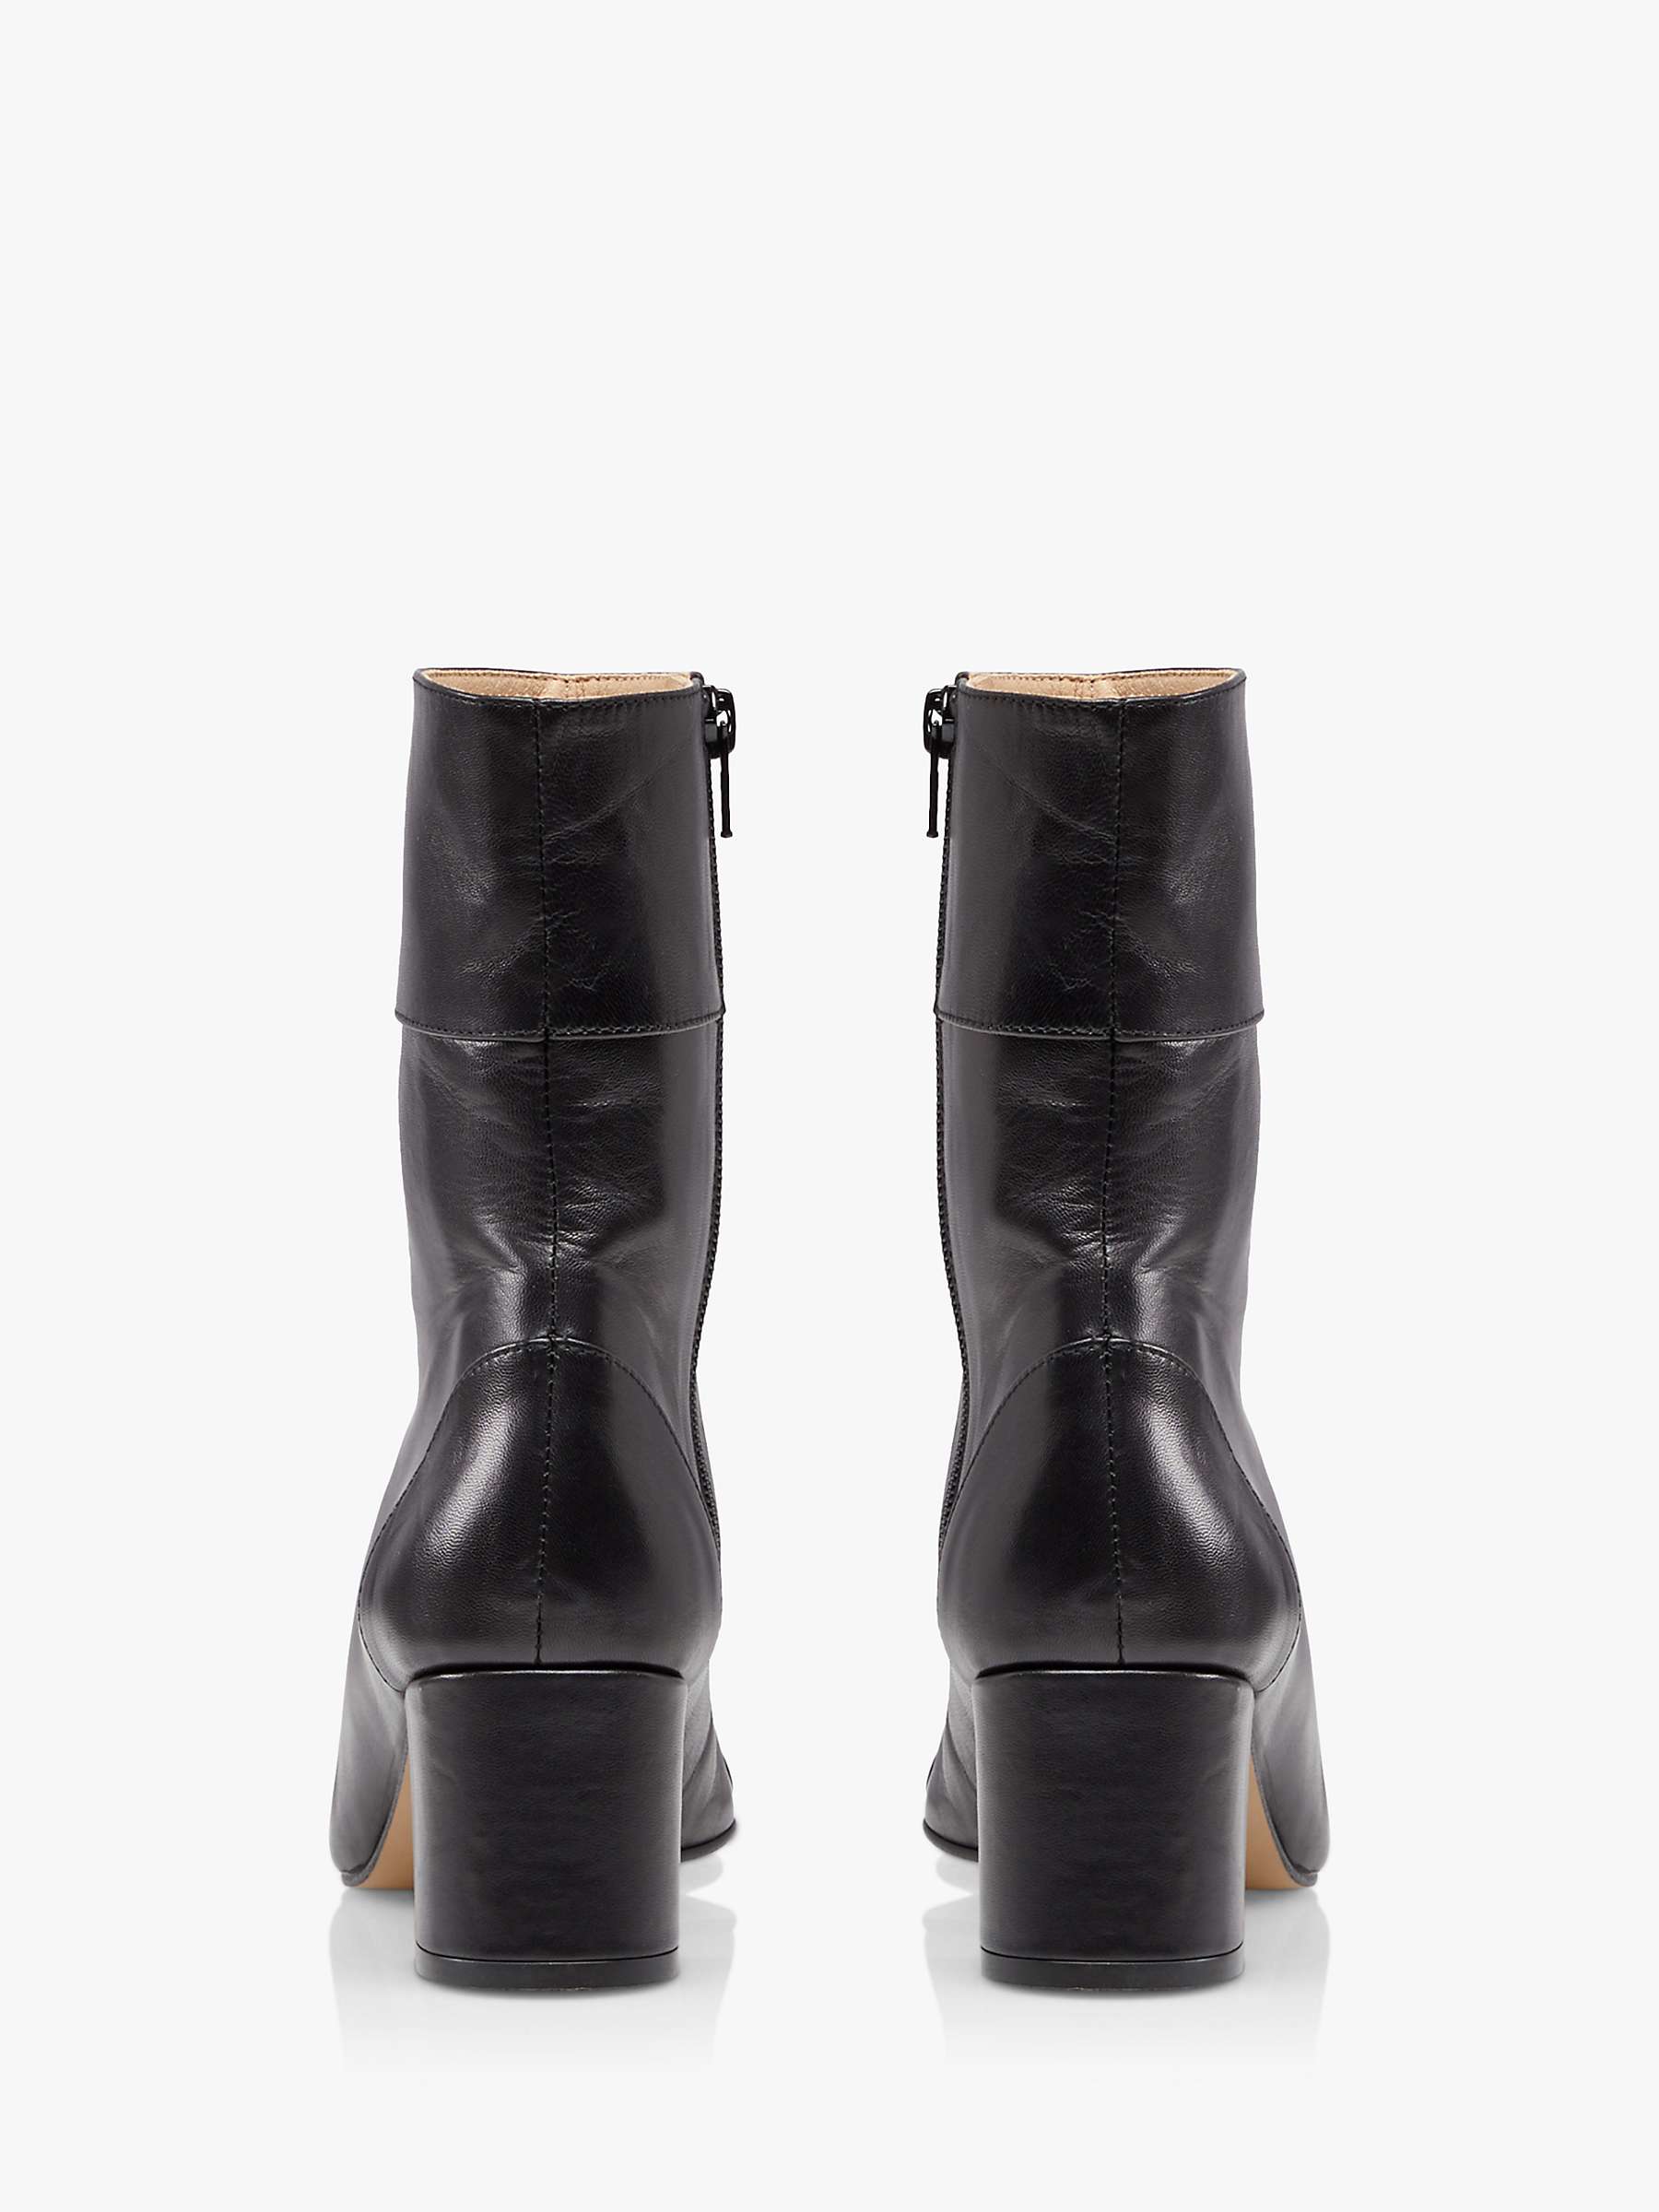 Dune Onyx Leather Ankle Boots, Black at John Lewis & Partners